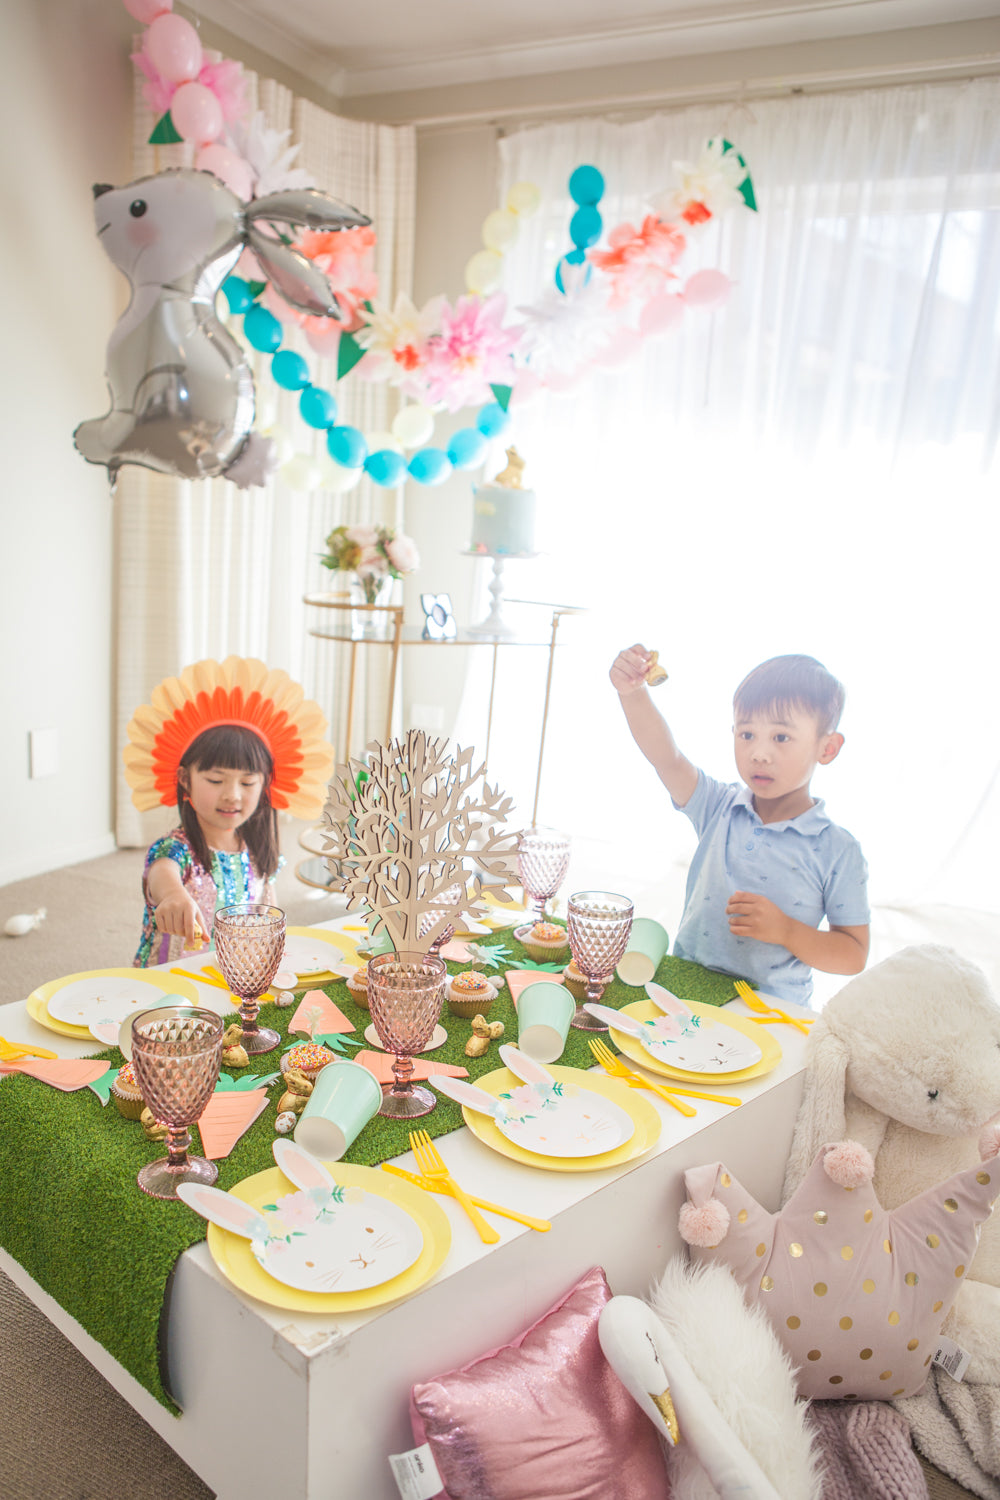 2 children at a Easter party 480x480 resolution